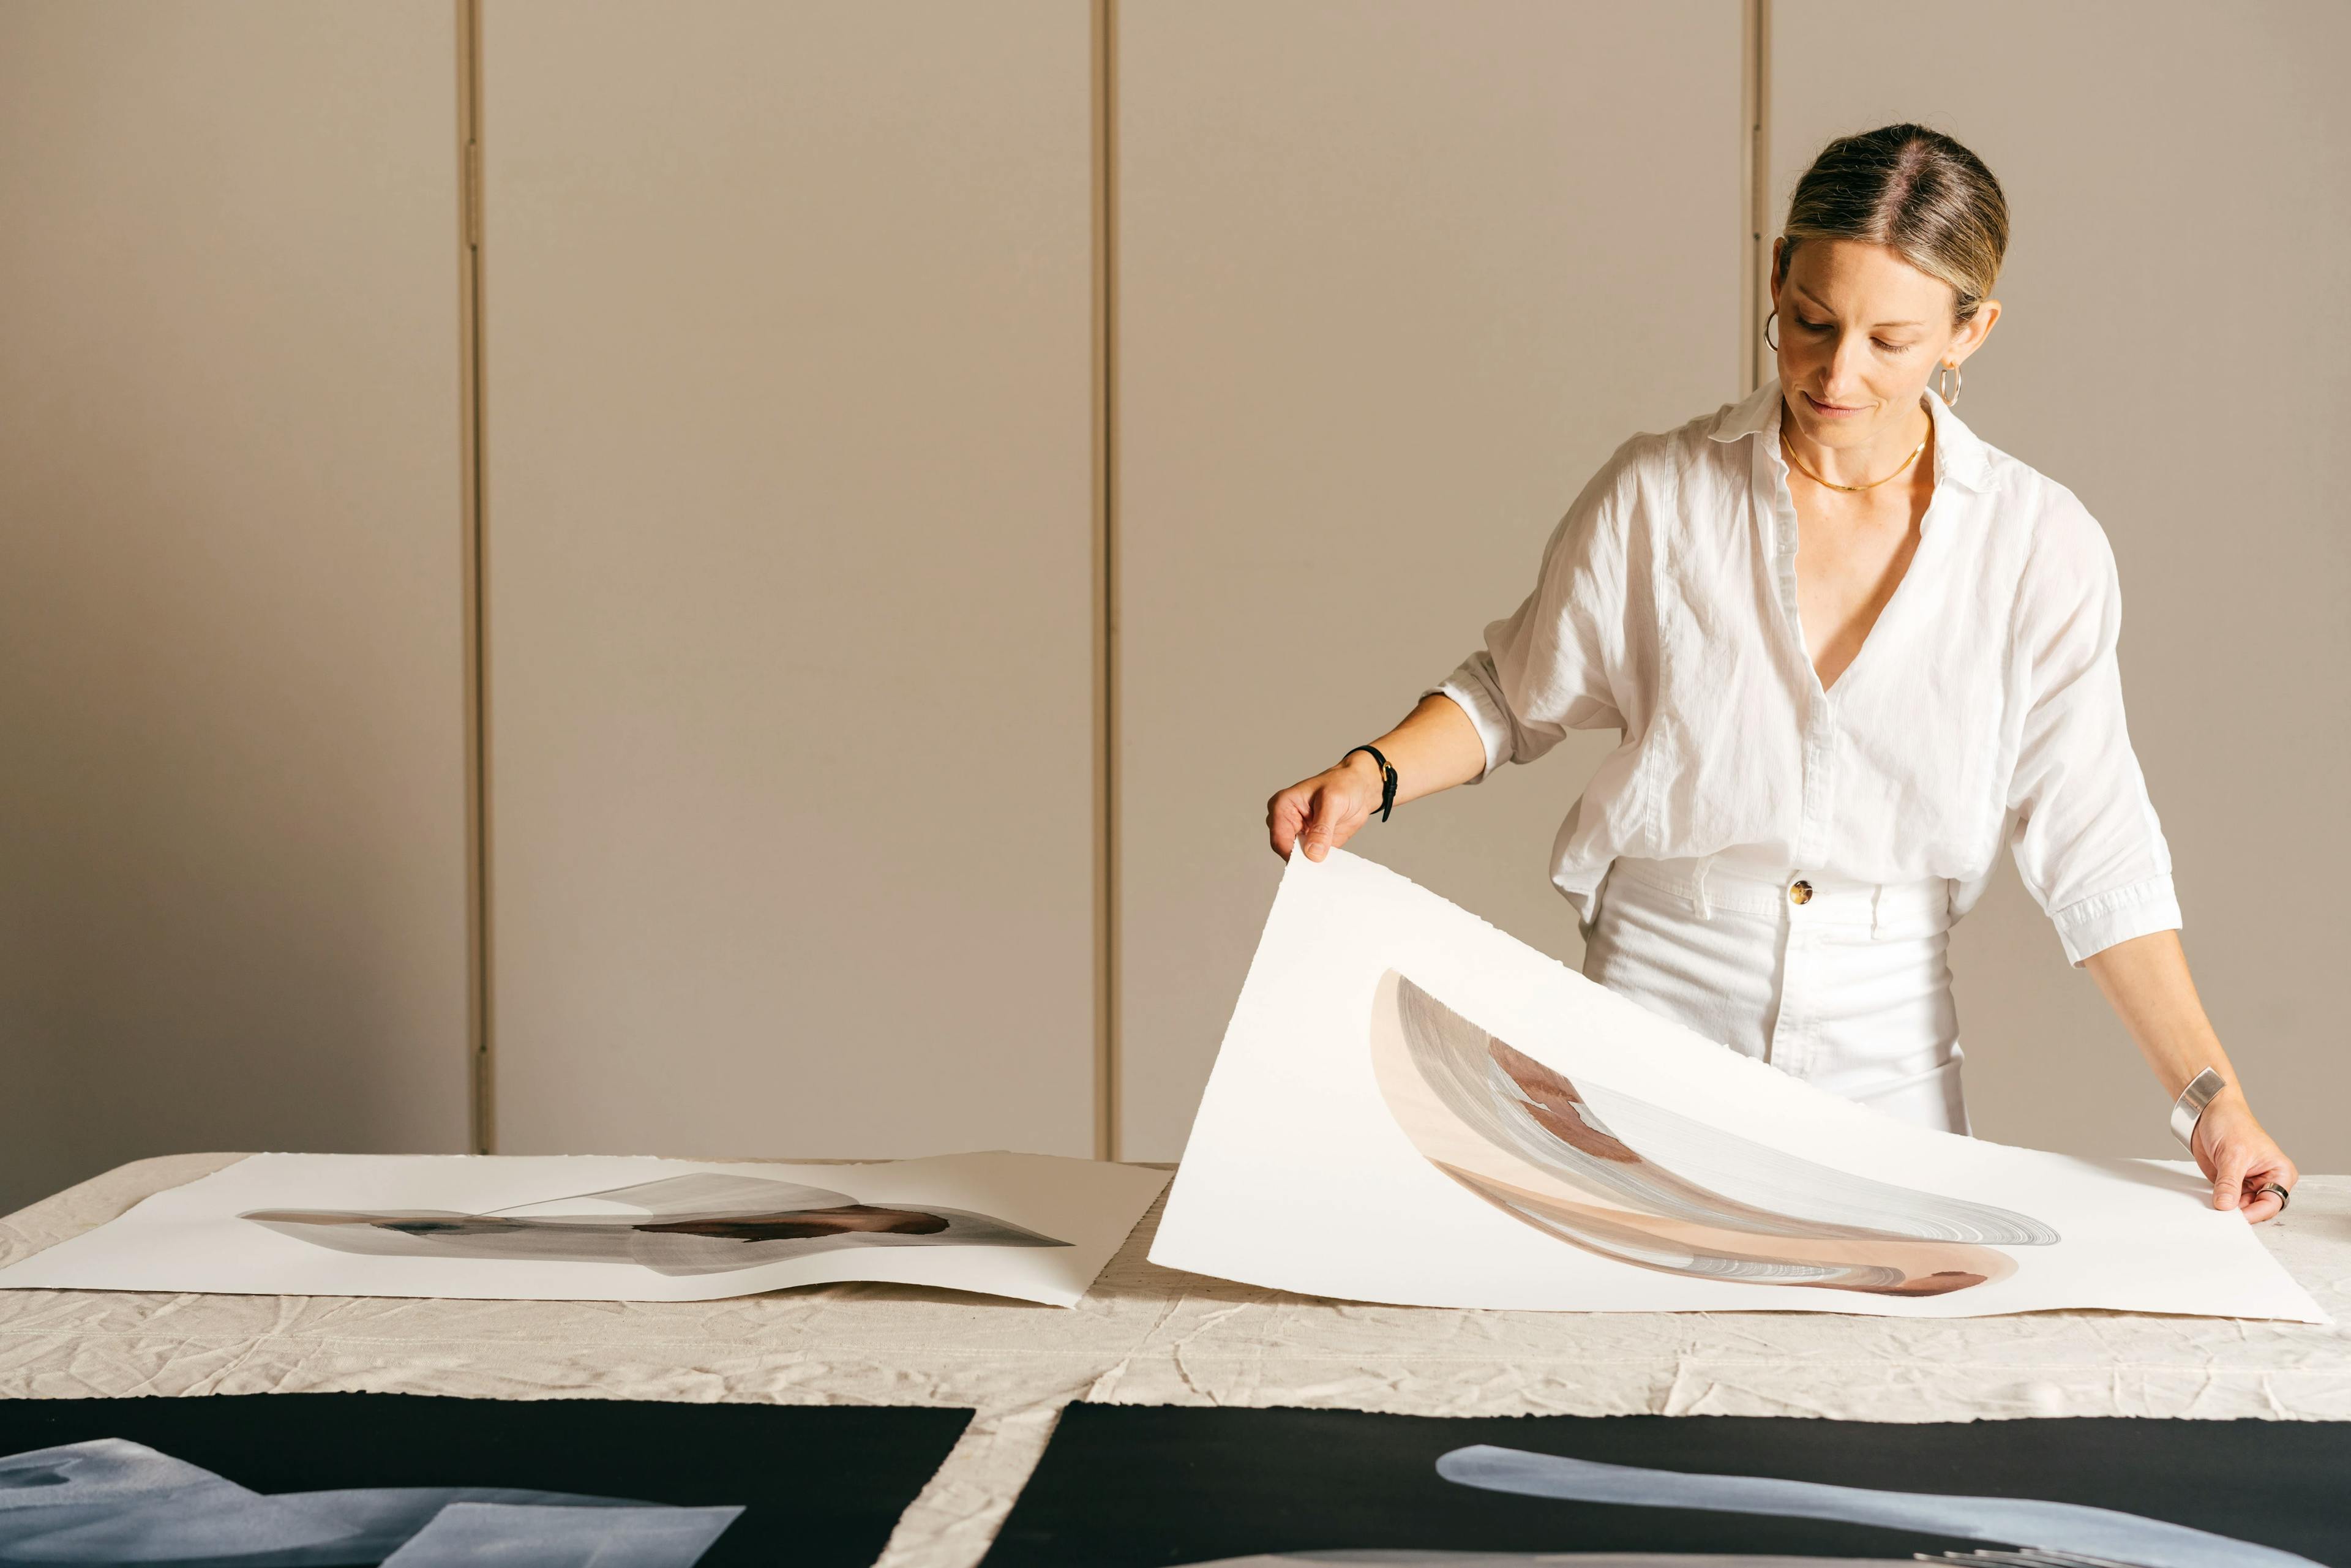 Artist Laura Naples dressed in white, standing at a table at MacArthur holding the corners of a gestural painting on white paper.